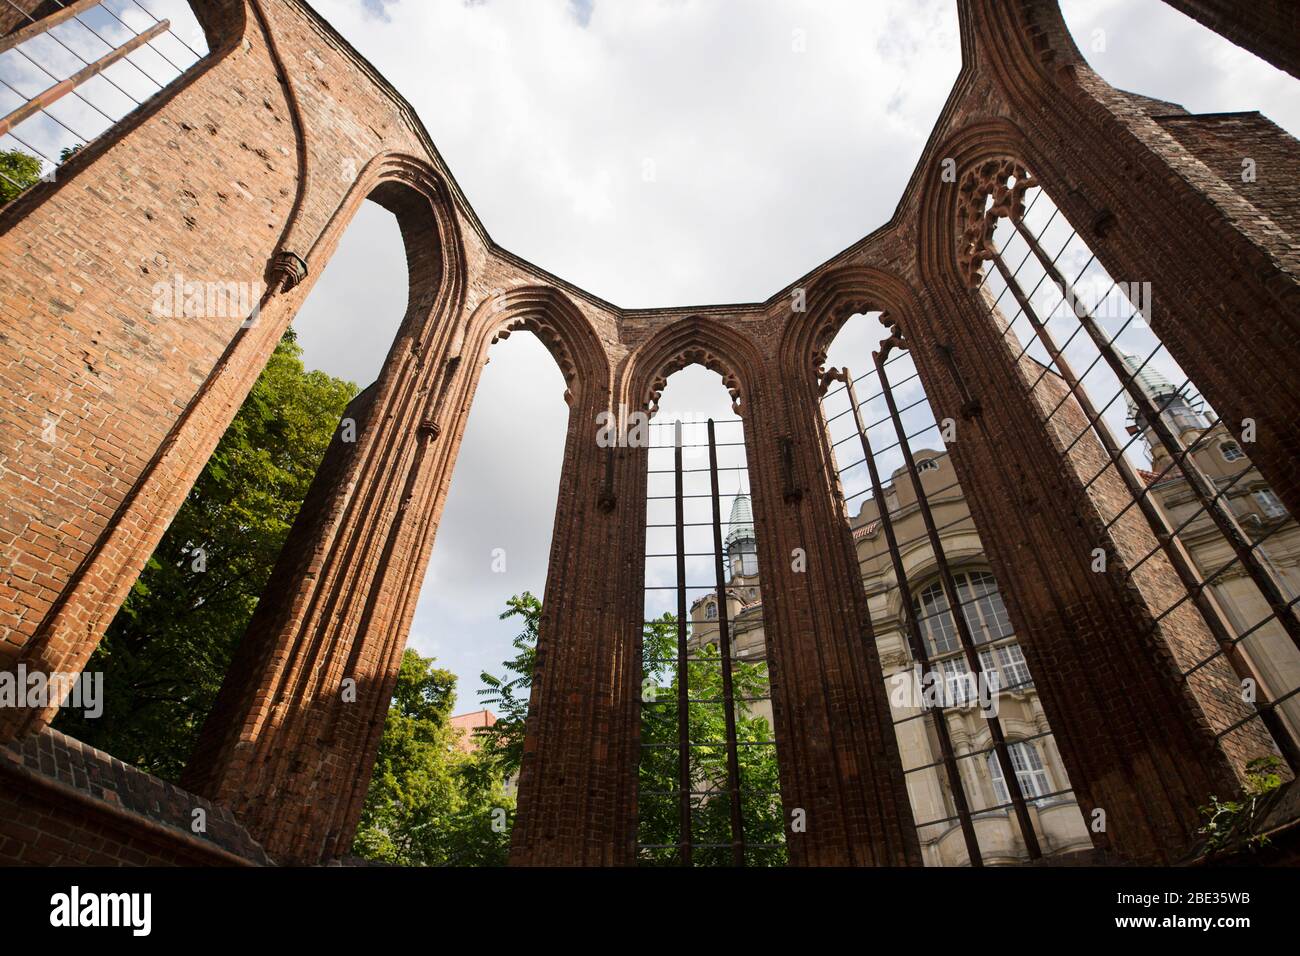 The ruins of the Franciscan monastery (Franziskaner-Klosterkirche) on Klosterstrasse in Berlin, Germany. The church was bombed in World War II. Stock Photo